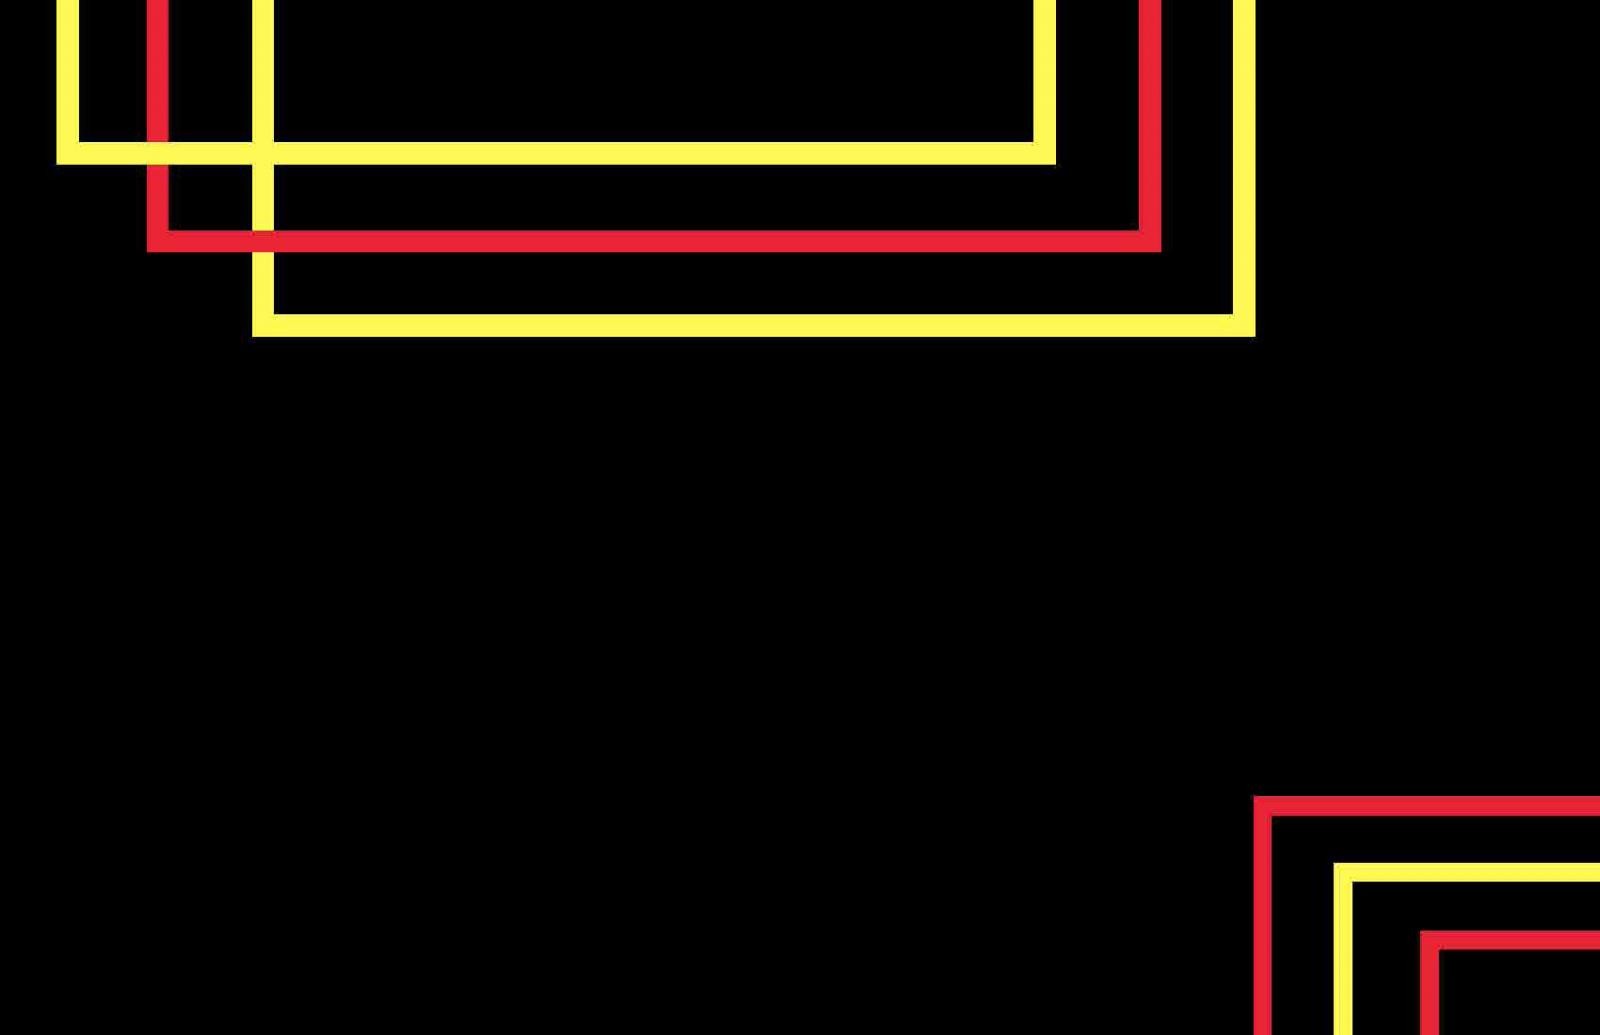 Yellow and red rectangular outlines graphic on black background